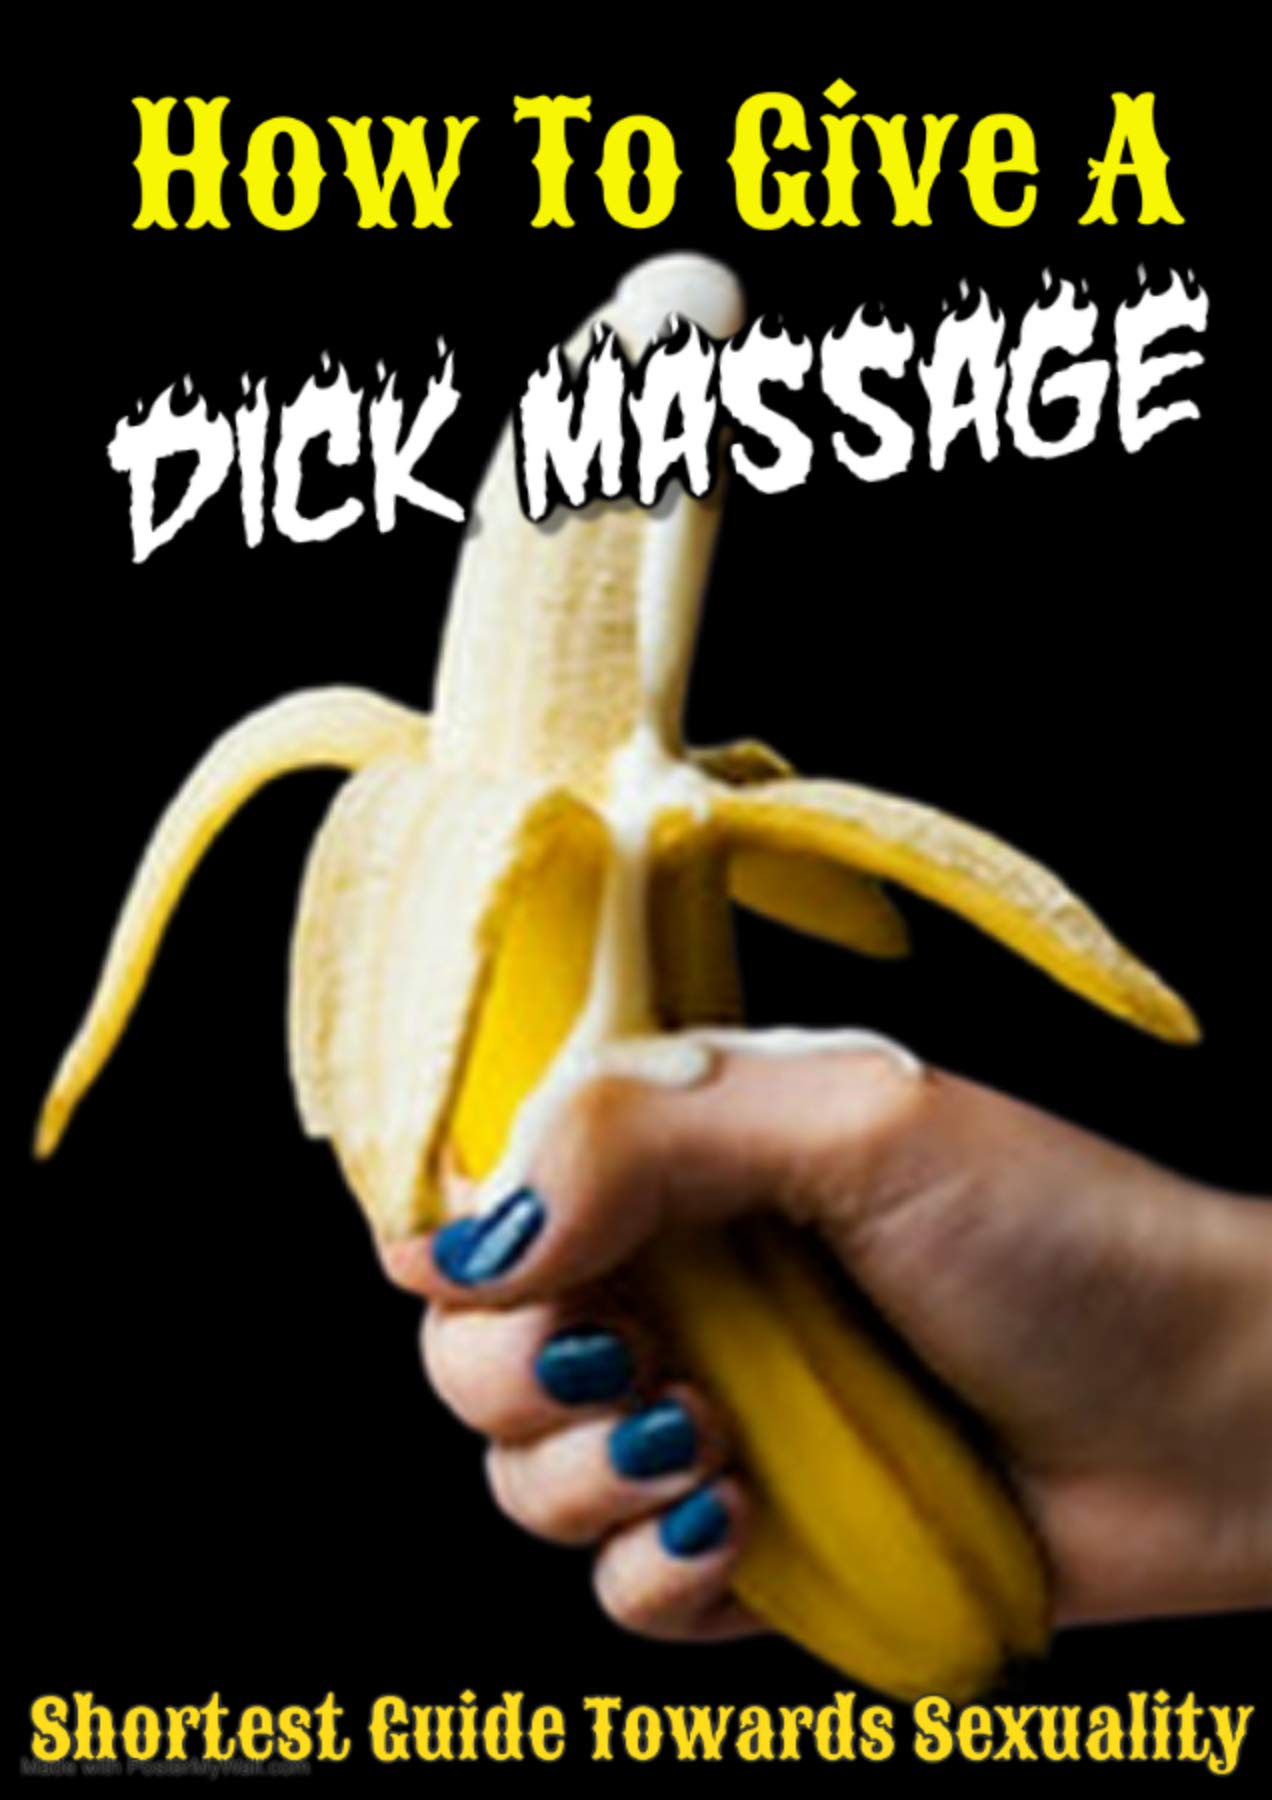 alex slade share how to give a penis massage photos